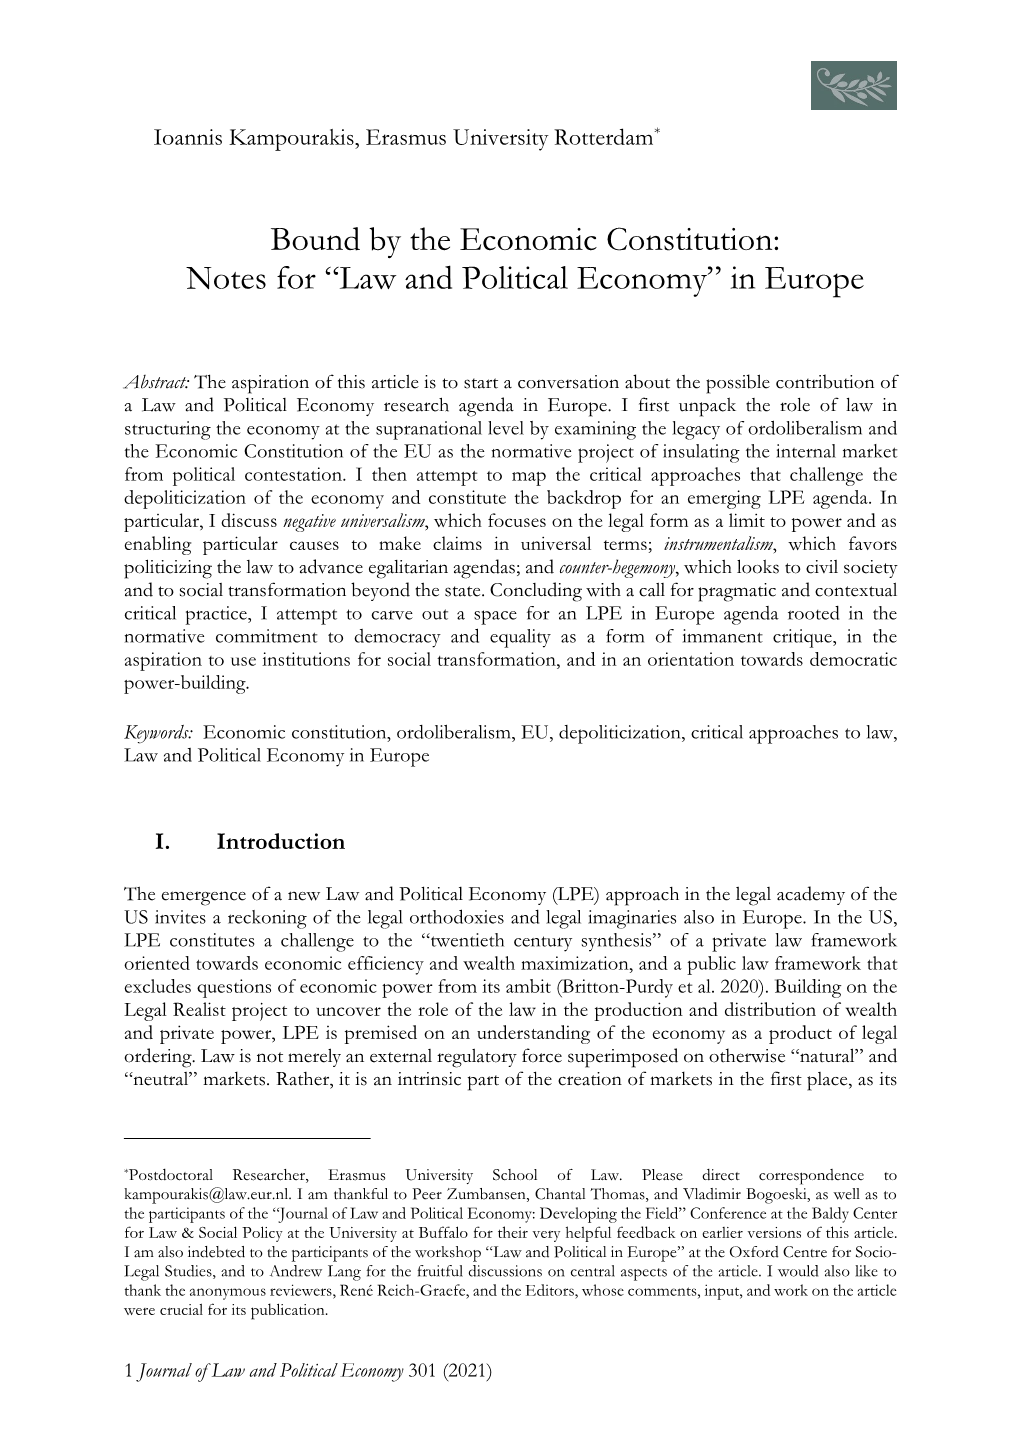 Bound by the Economic Constitution: Notes for “Law and Political Economy” in Europe